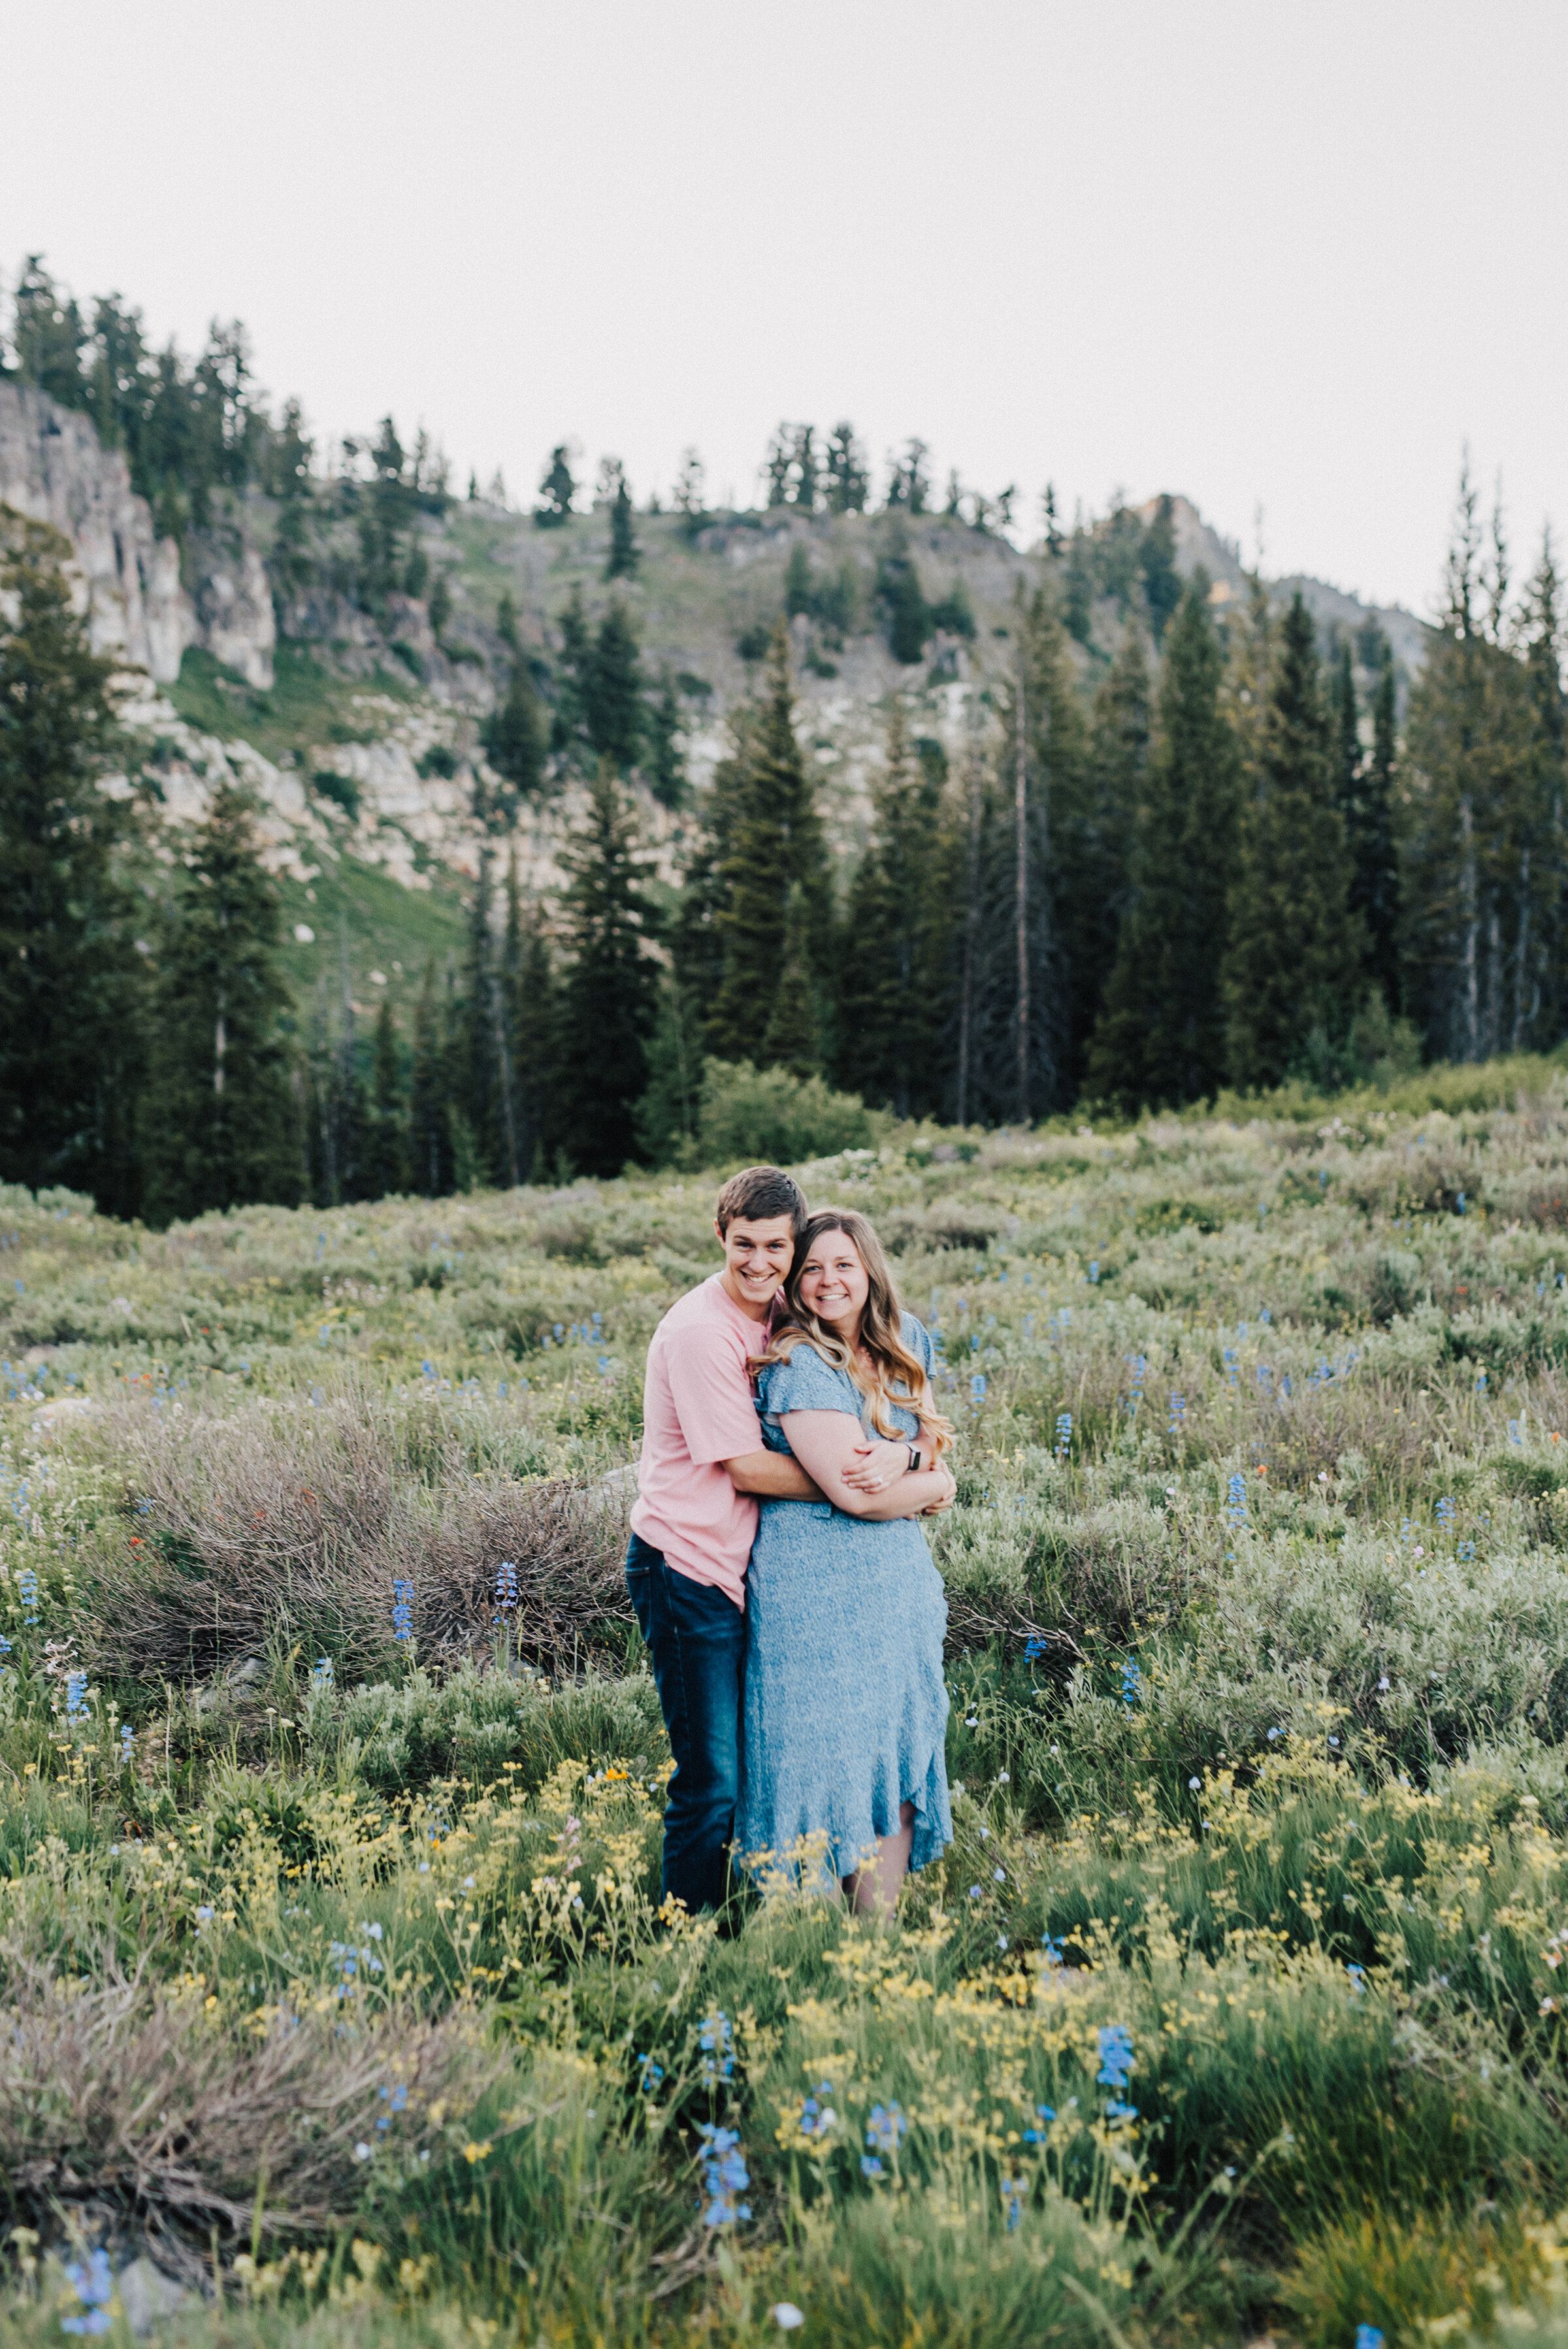  Sweetest couple surrounded by wild flowers at this lovely family photoshoot up Logan canyon. Logan Utah family photographer Kristi Alyse photography Tony Grove forest nature photos Logan canyon light blue family photos wild flowers grand parents children parents spouses reunited dreamy scenic photo shoot #kristialysephotography #utahphotographer #familyphotography #logancanyon #familyphotos #forest #wildflowers #northernutah #familyportraits #family 